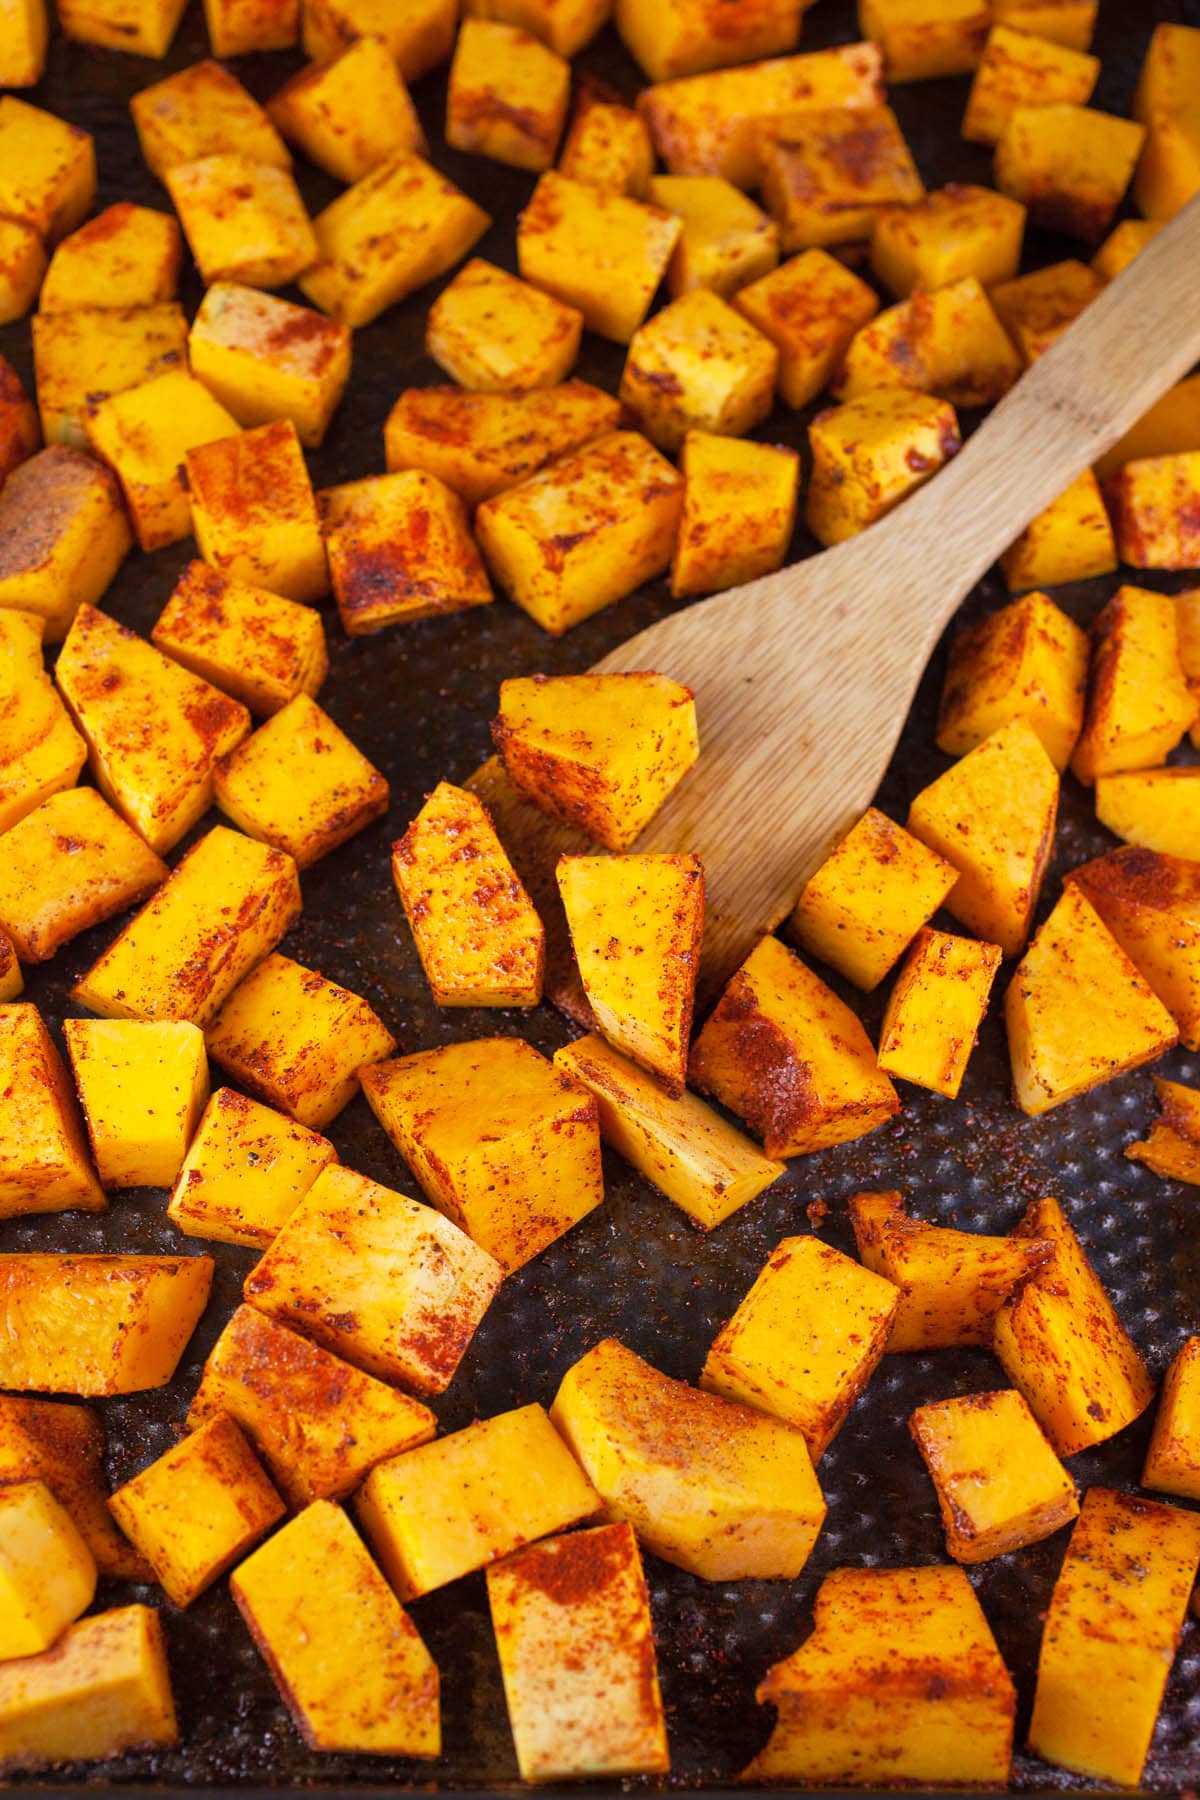 Butternut squash chunks in olive oil and spices on baking sheet.